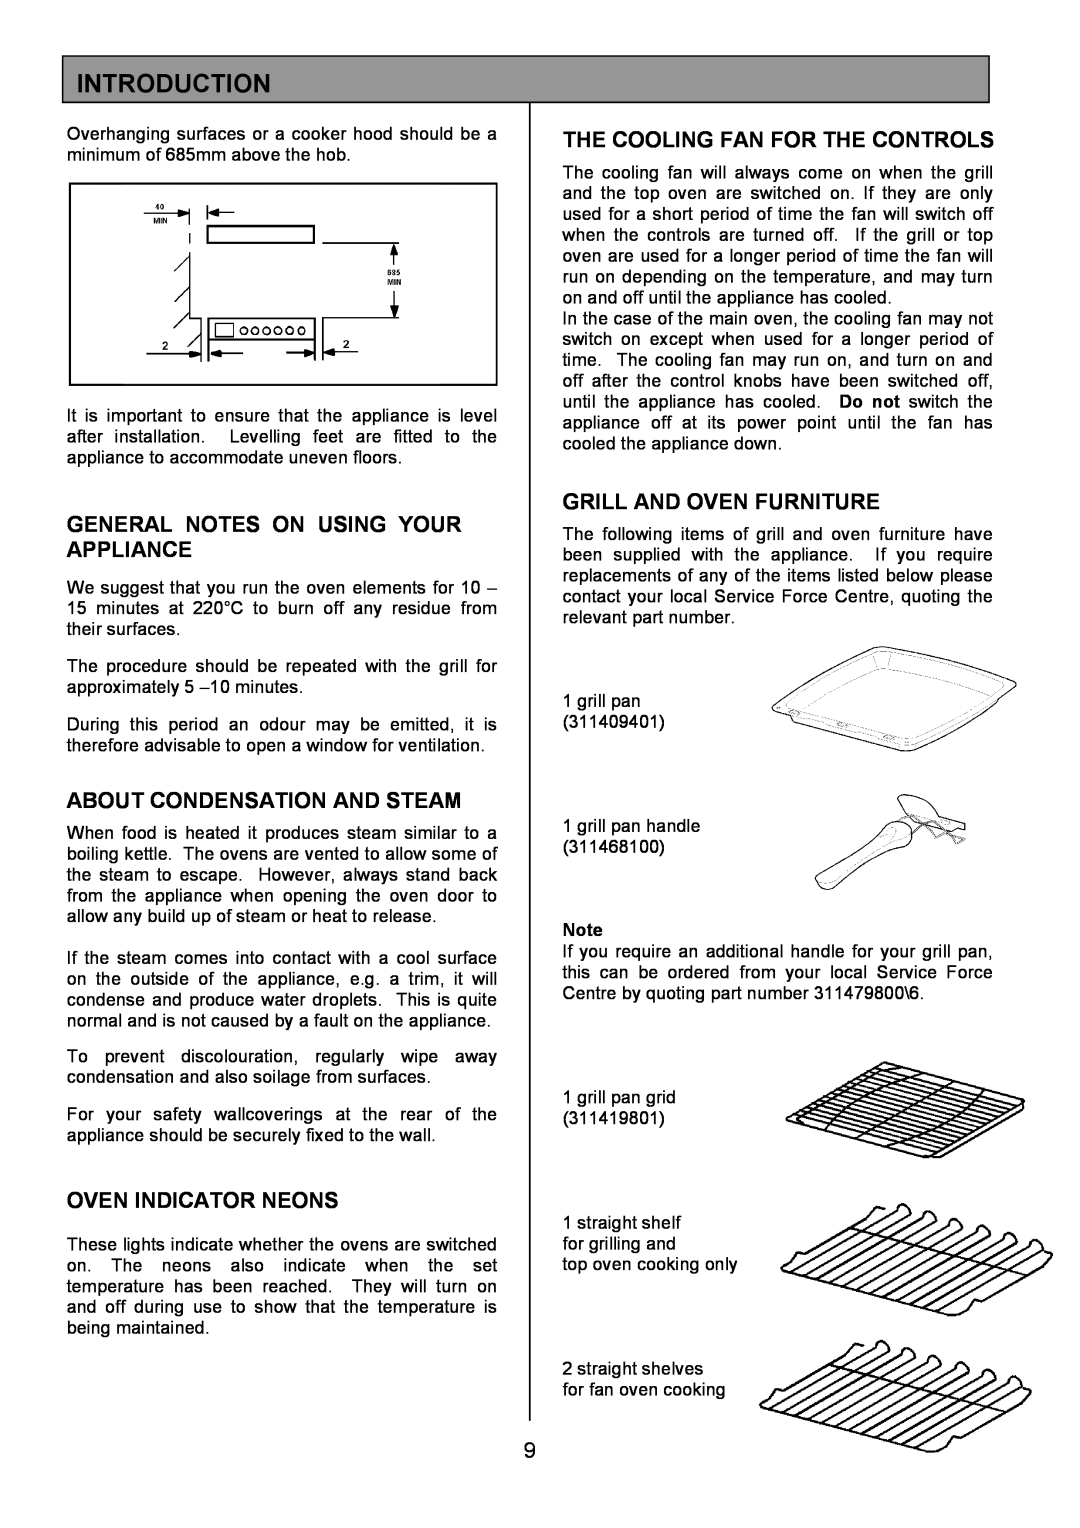 Zanussi ZCE 8020AX/CH manual General Notes On Using Your Appliance, About Condensation And Steam, Oven Indicator Neons 